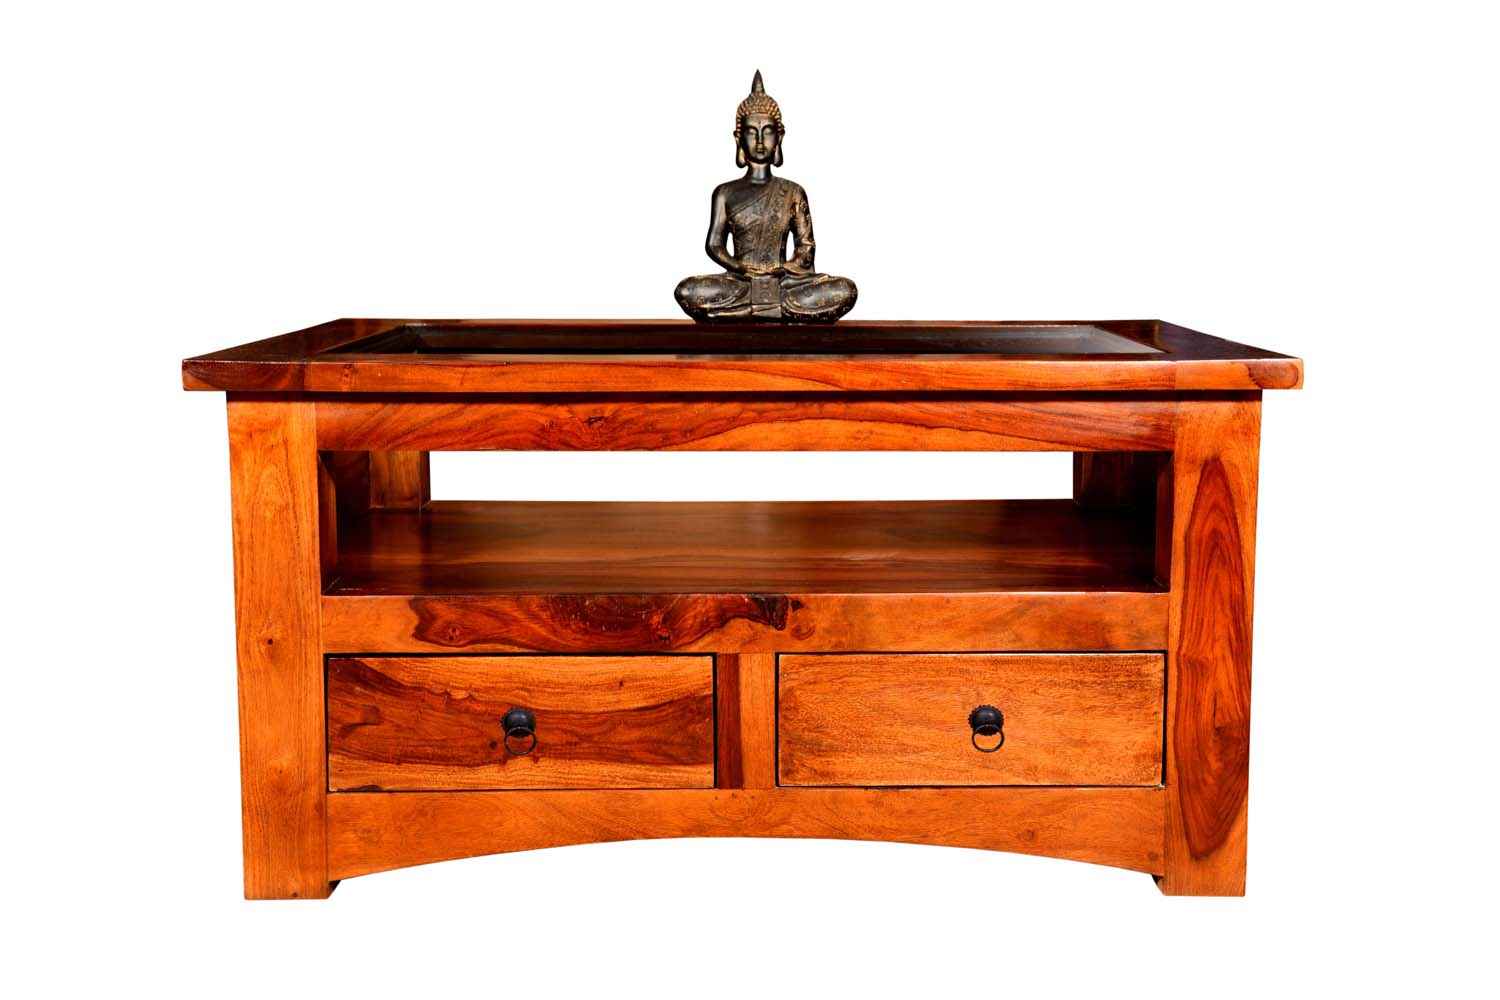 Buy Mint two drawer teak finish coffee table | Living Room ...